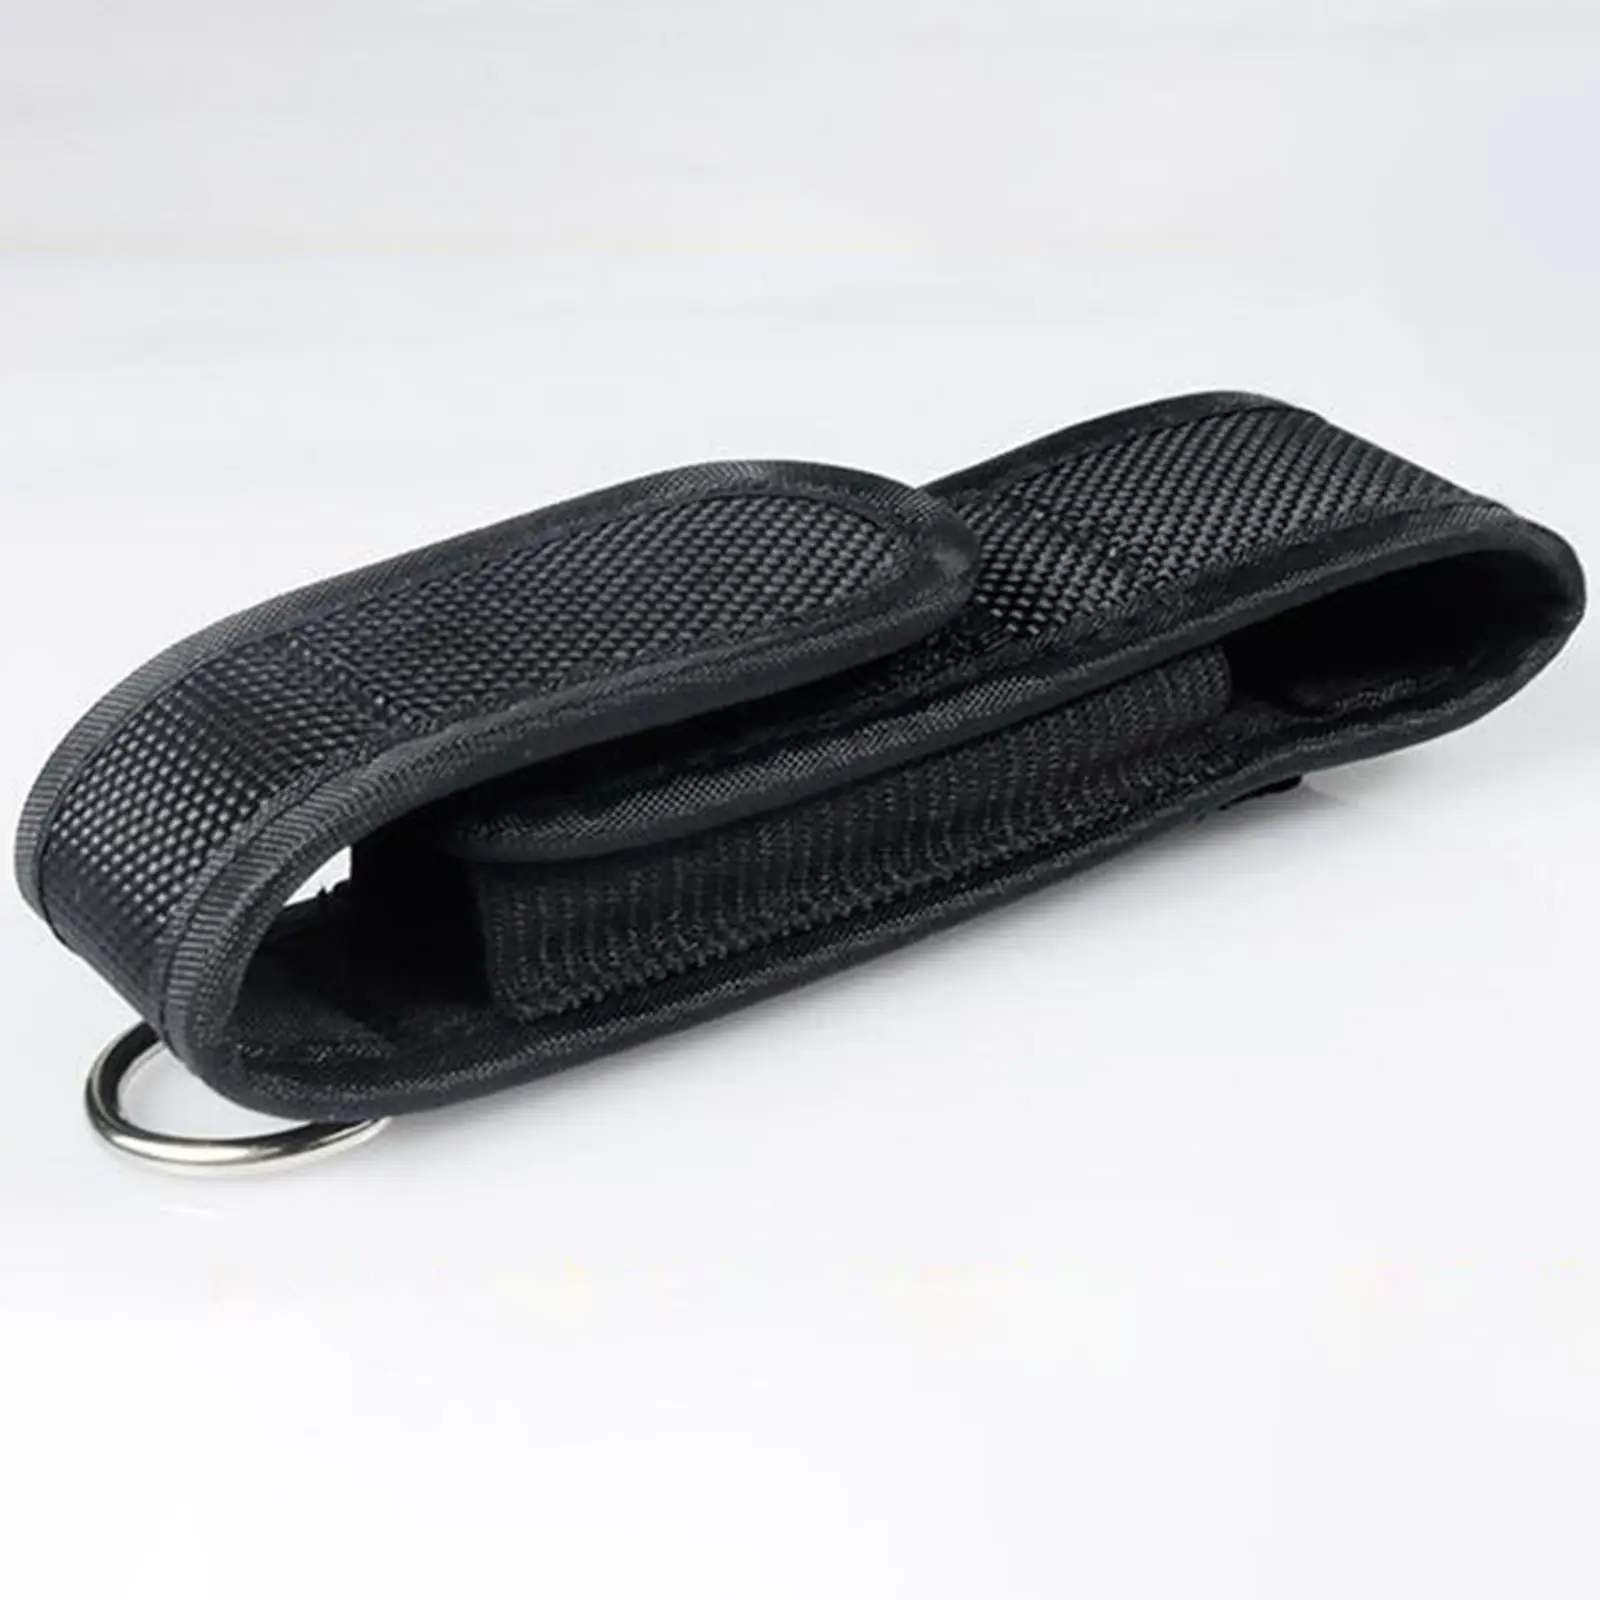 Flashlight Pouch Durable Torch Cover Easy to Carry Flashlight Storage Bag for Outdoor Hunting